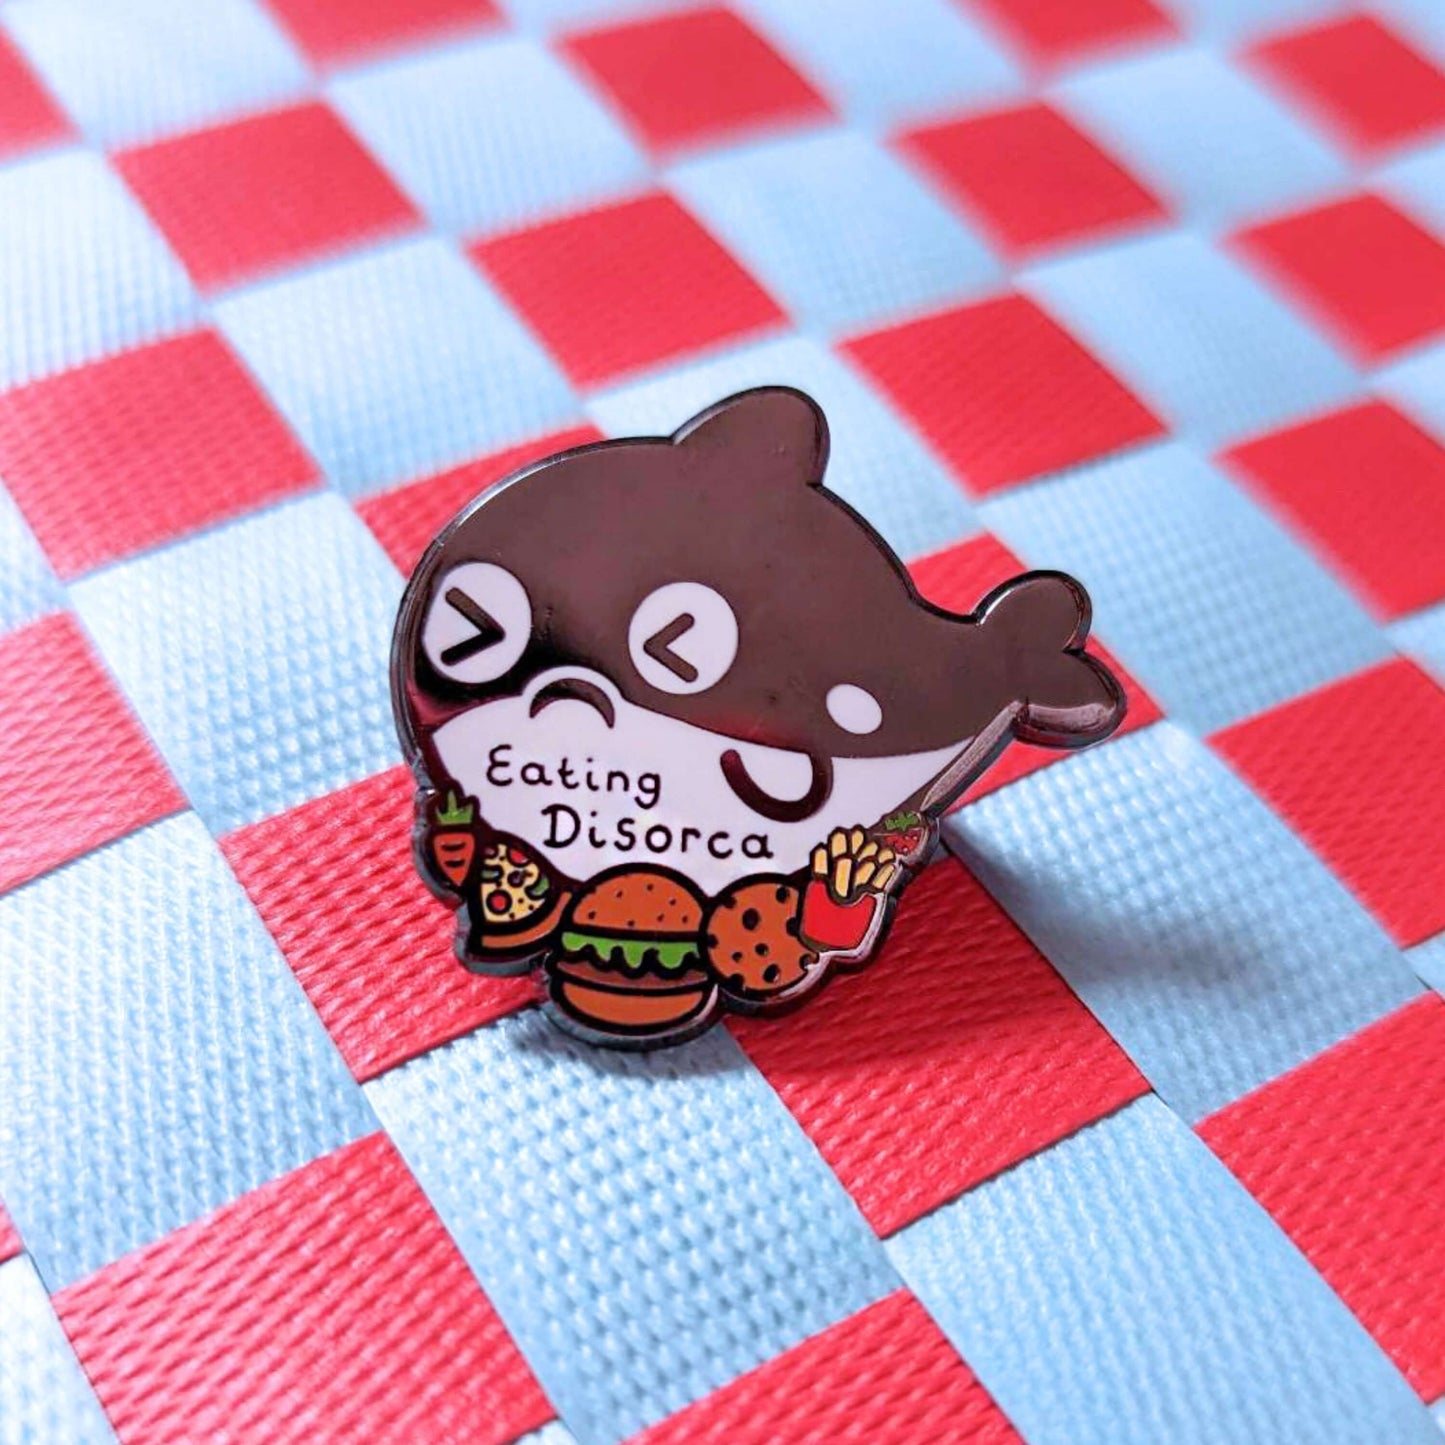 The Eating Disorca Orca Whale Enamel Pin - Eating Disorder on a red and white background. The black orca whale shaped enamel pin has a stressed expression whilst surrounded by burgers, pizzas, cookies, fries and fruit with 'eating discorca' across its middle. The design is raising awareness for eating disorders.